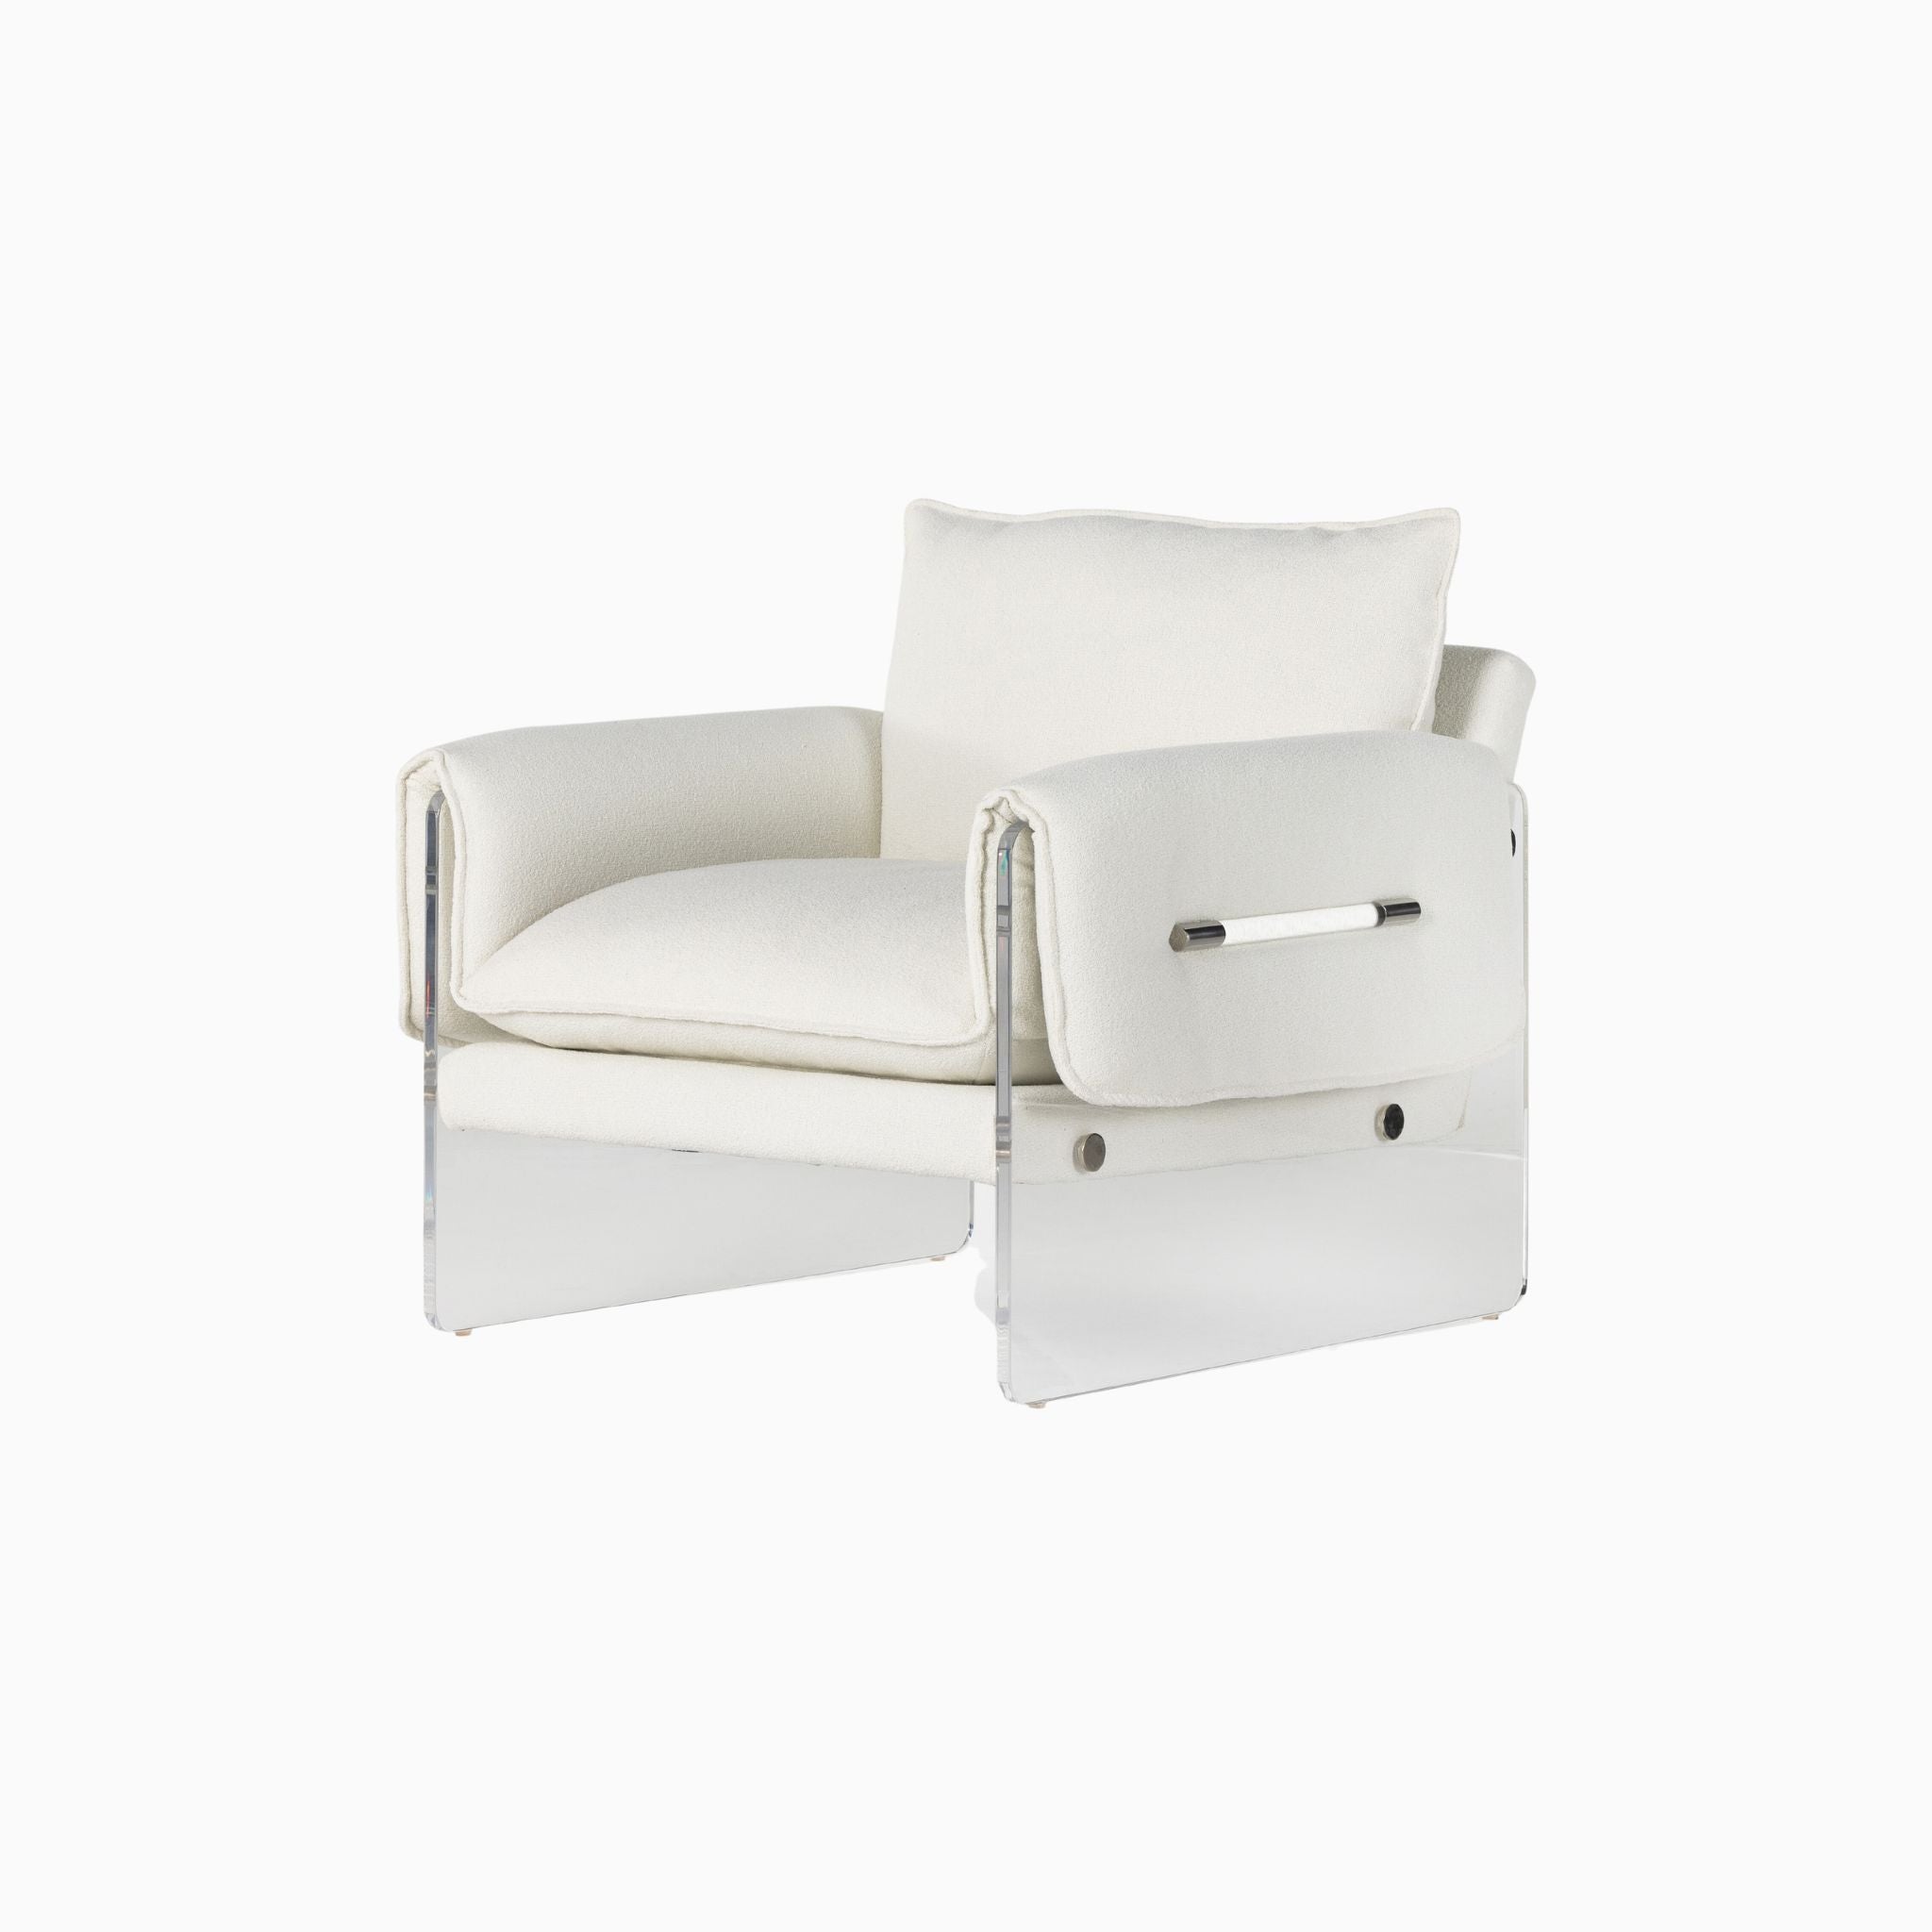 ELSTON CHAIR - Simply Elevated Home Furnishings 